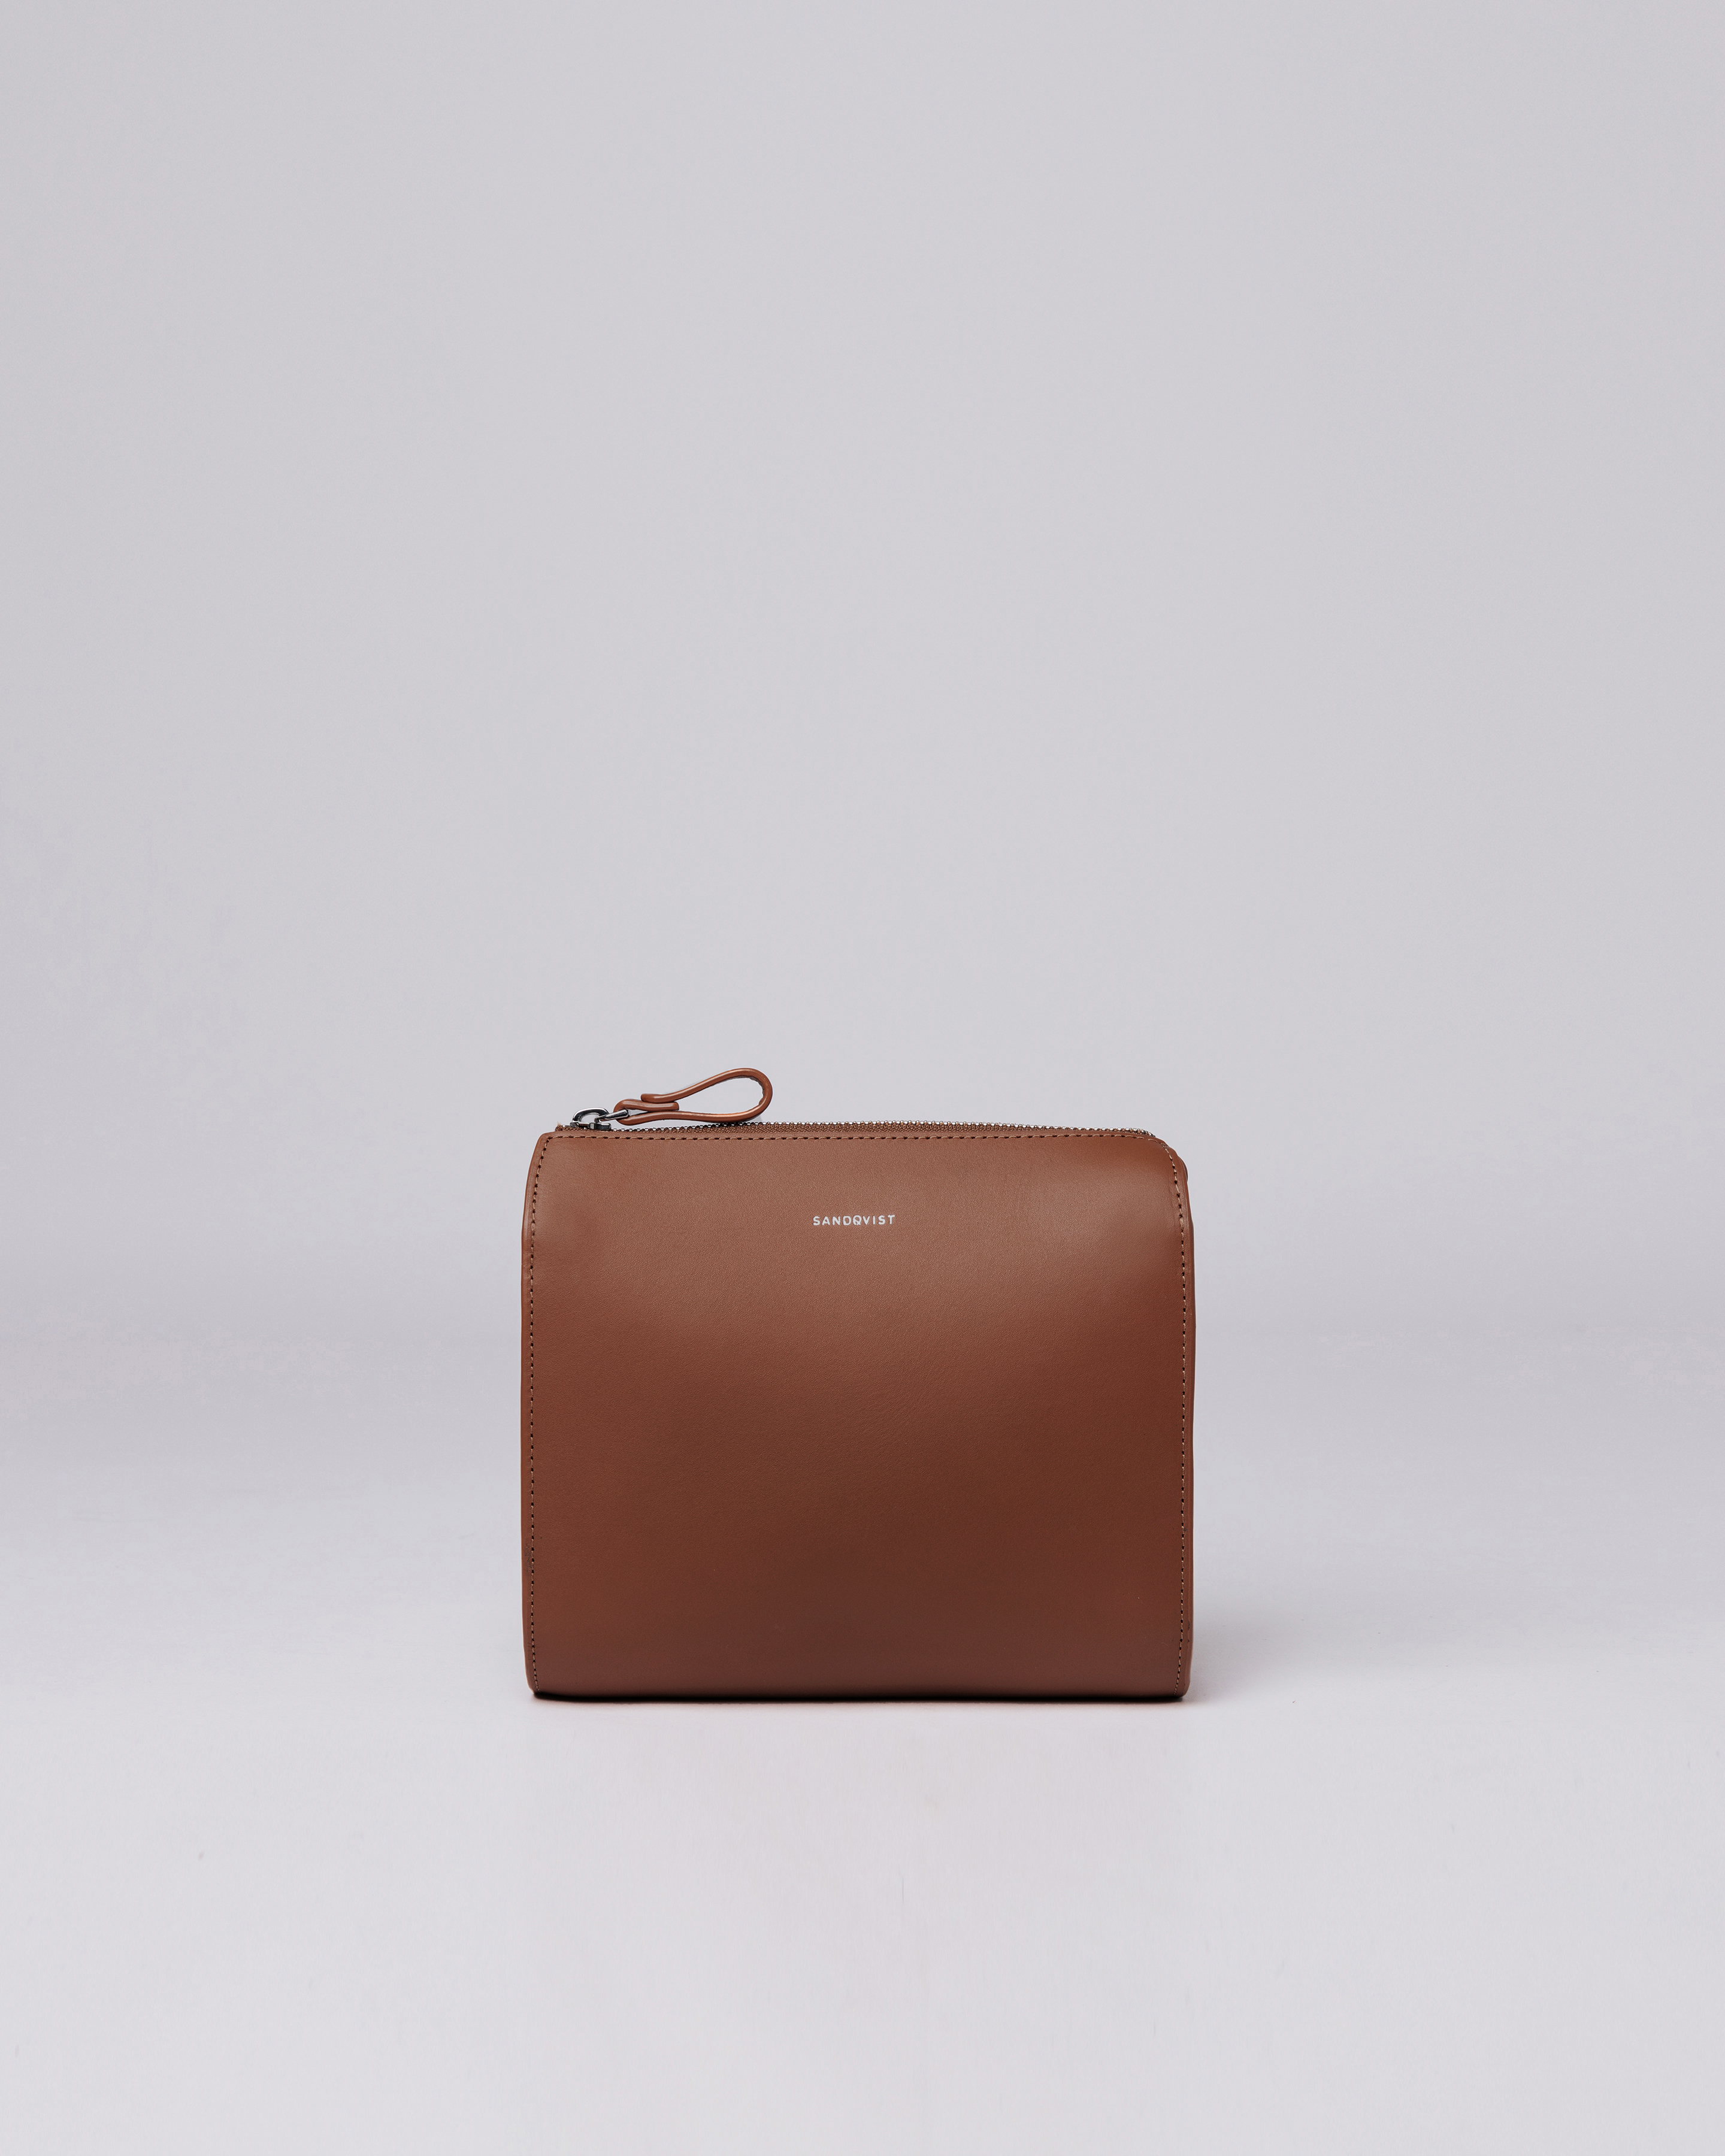 Shop bags and accessories - Shop a bag and accessory from Sandqvist